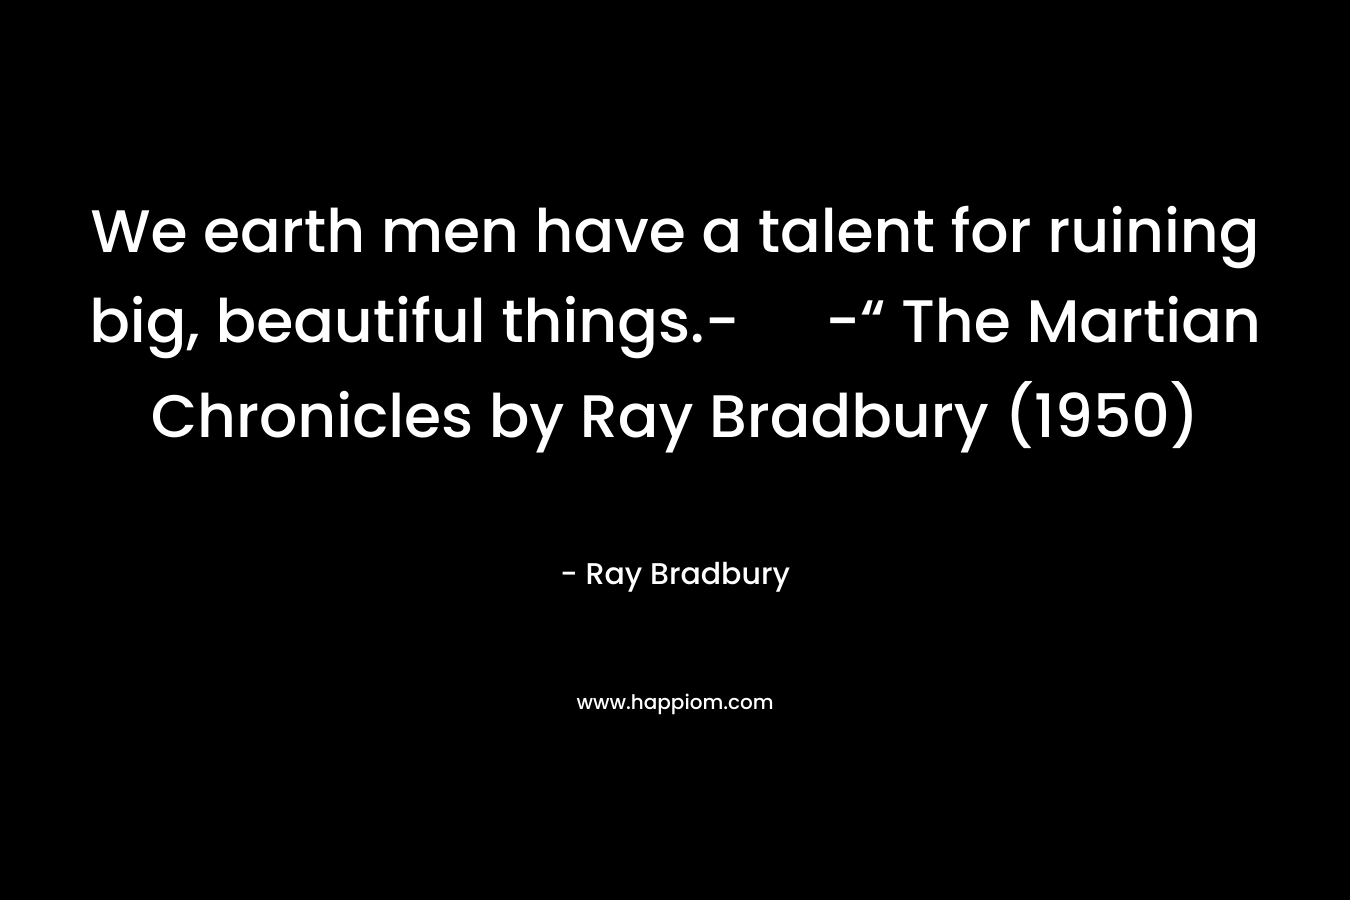 We earth men have a talent for ruining big, beautiful things.- -“ The Martian Chronicles by Ray Bradbury (1950)